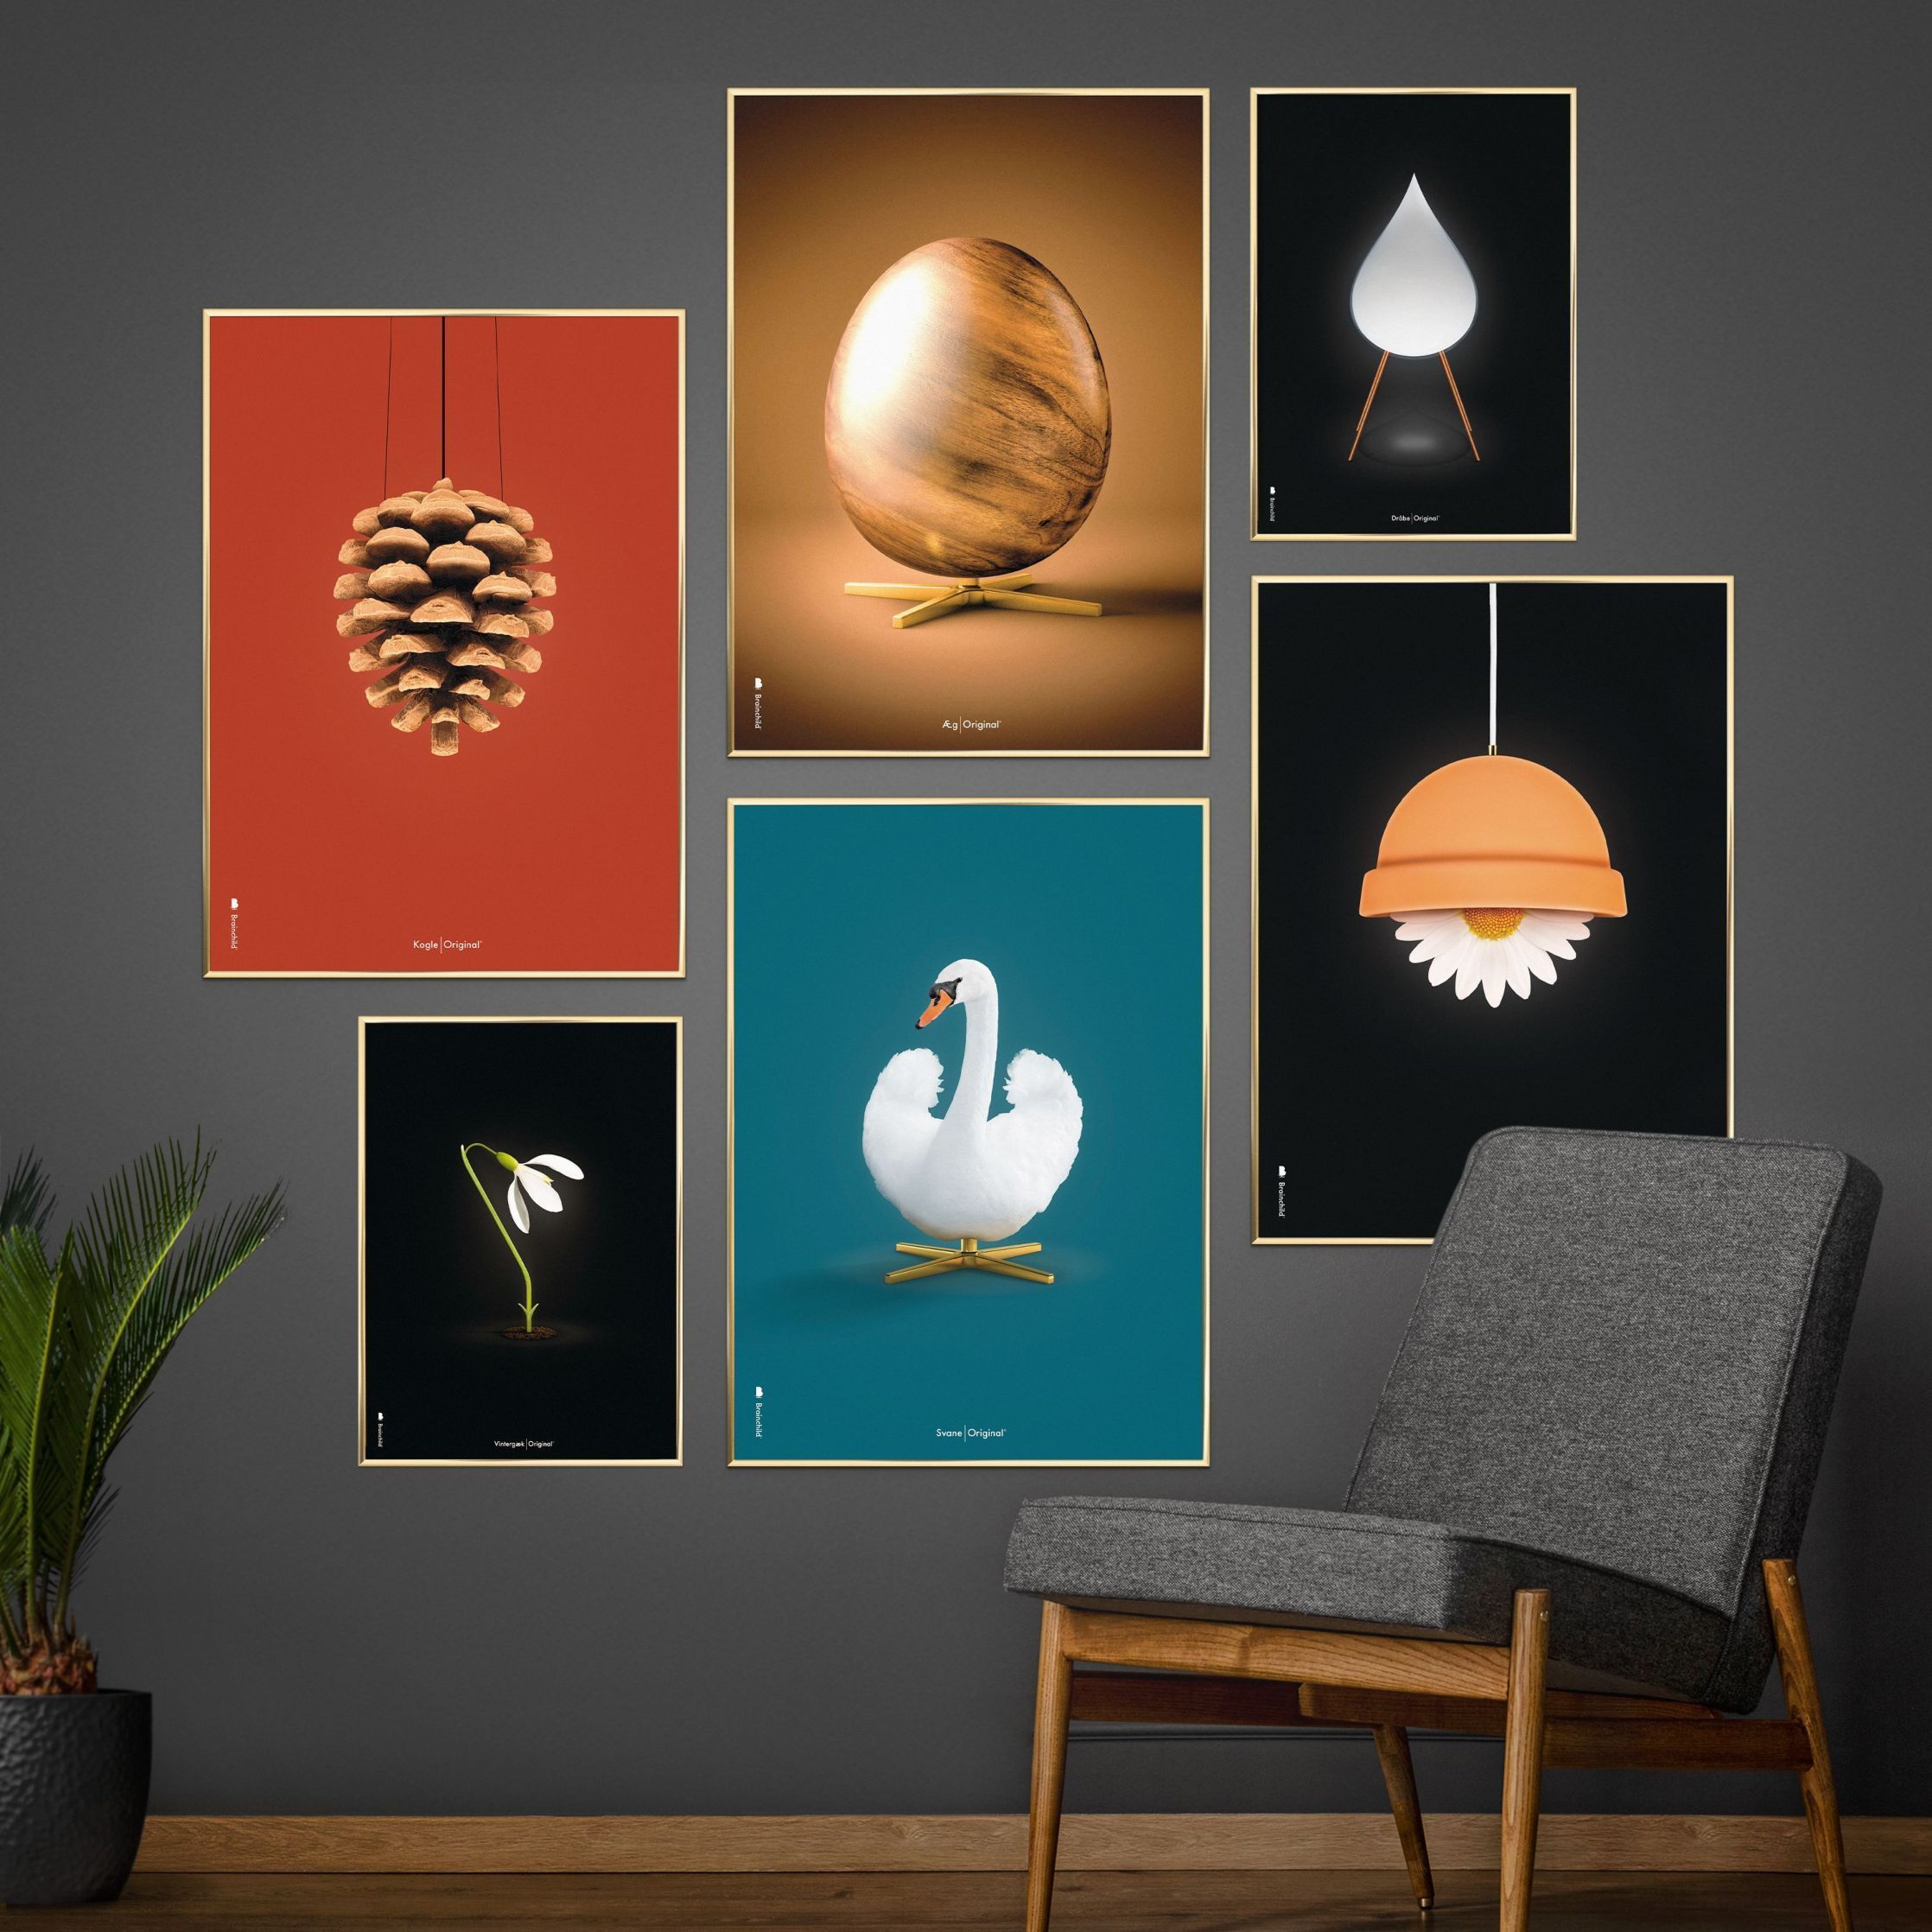 Brainchild Pine Cone Classic Poster, Frame Made Of Light Wood 70x100 Cm, Red Background